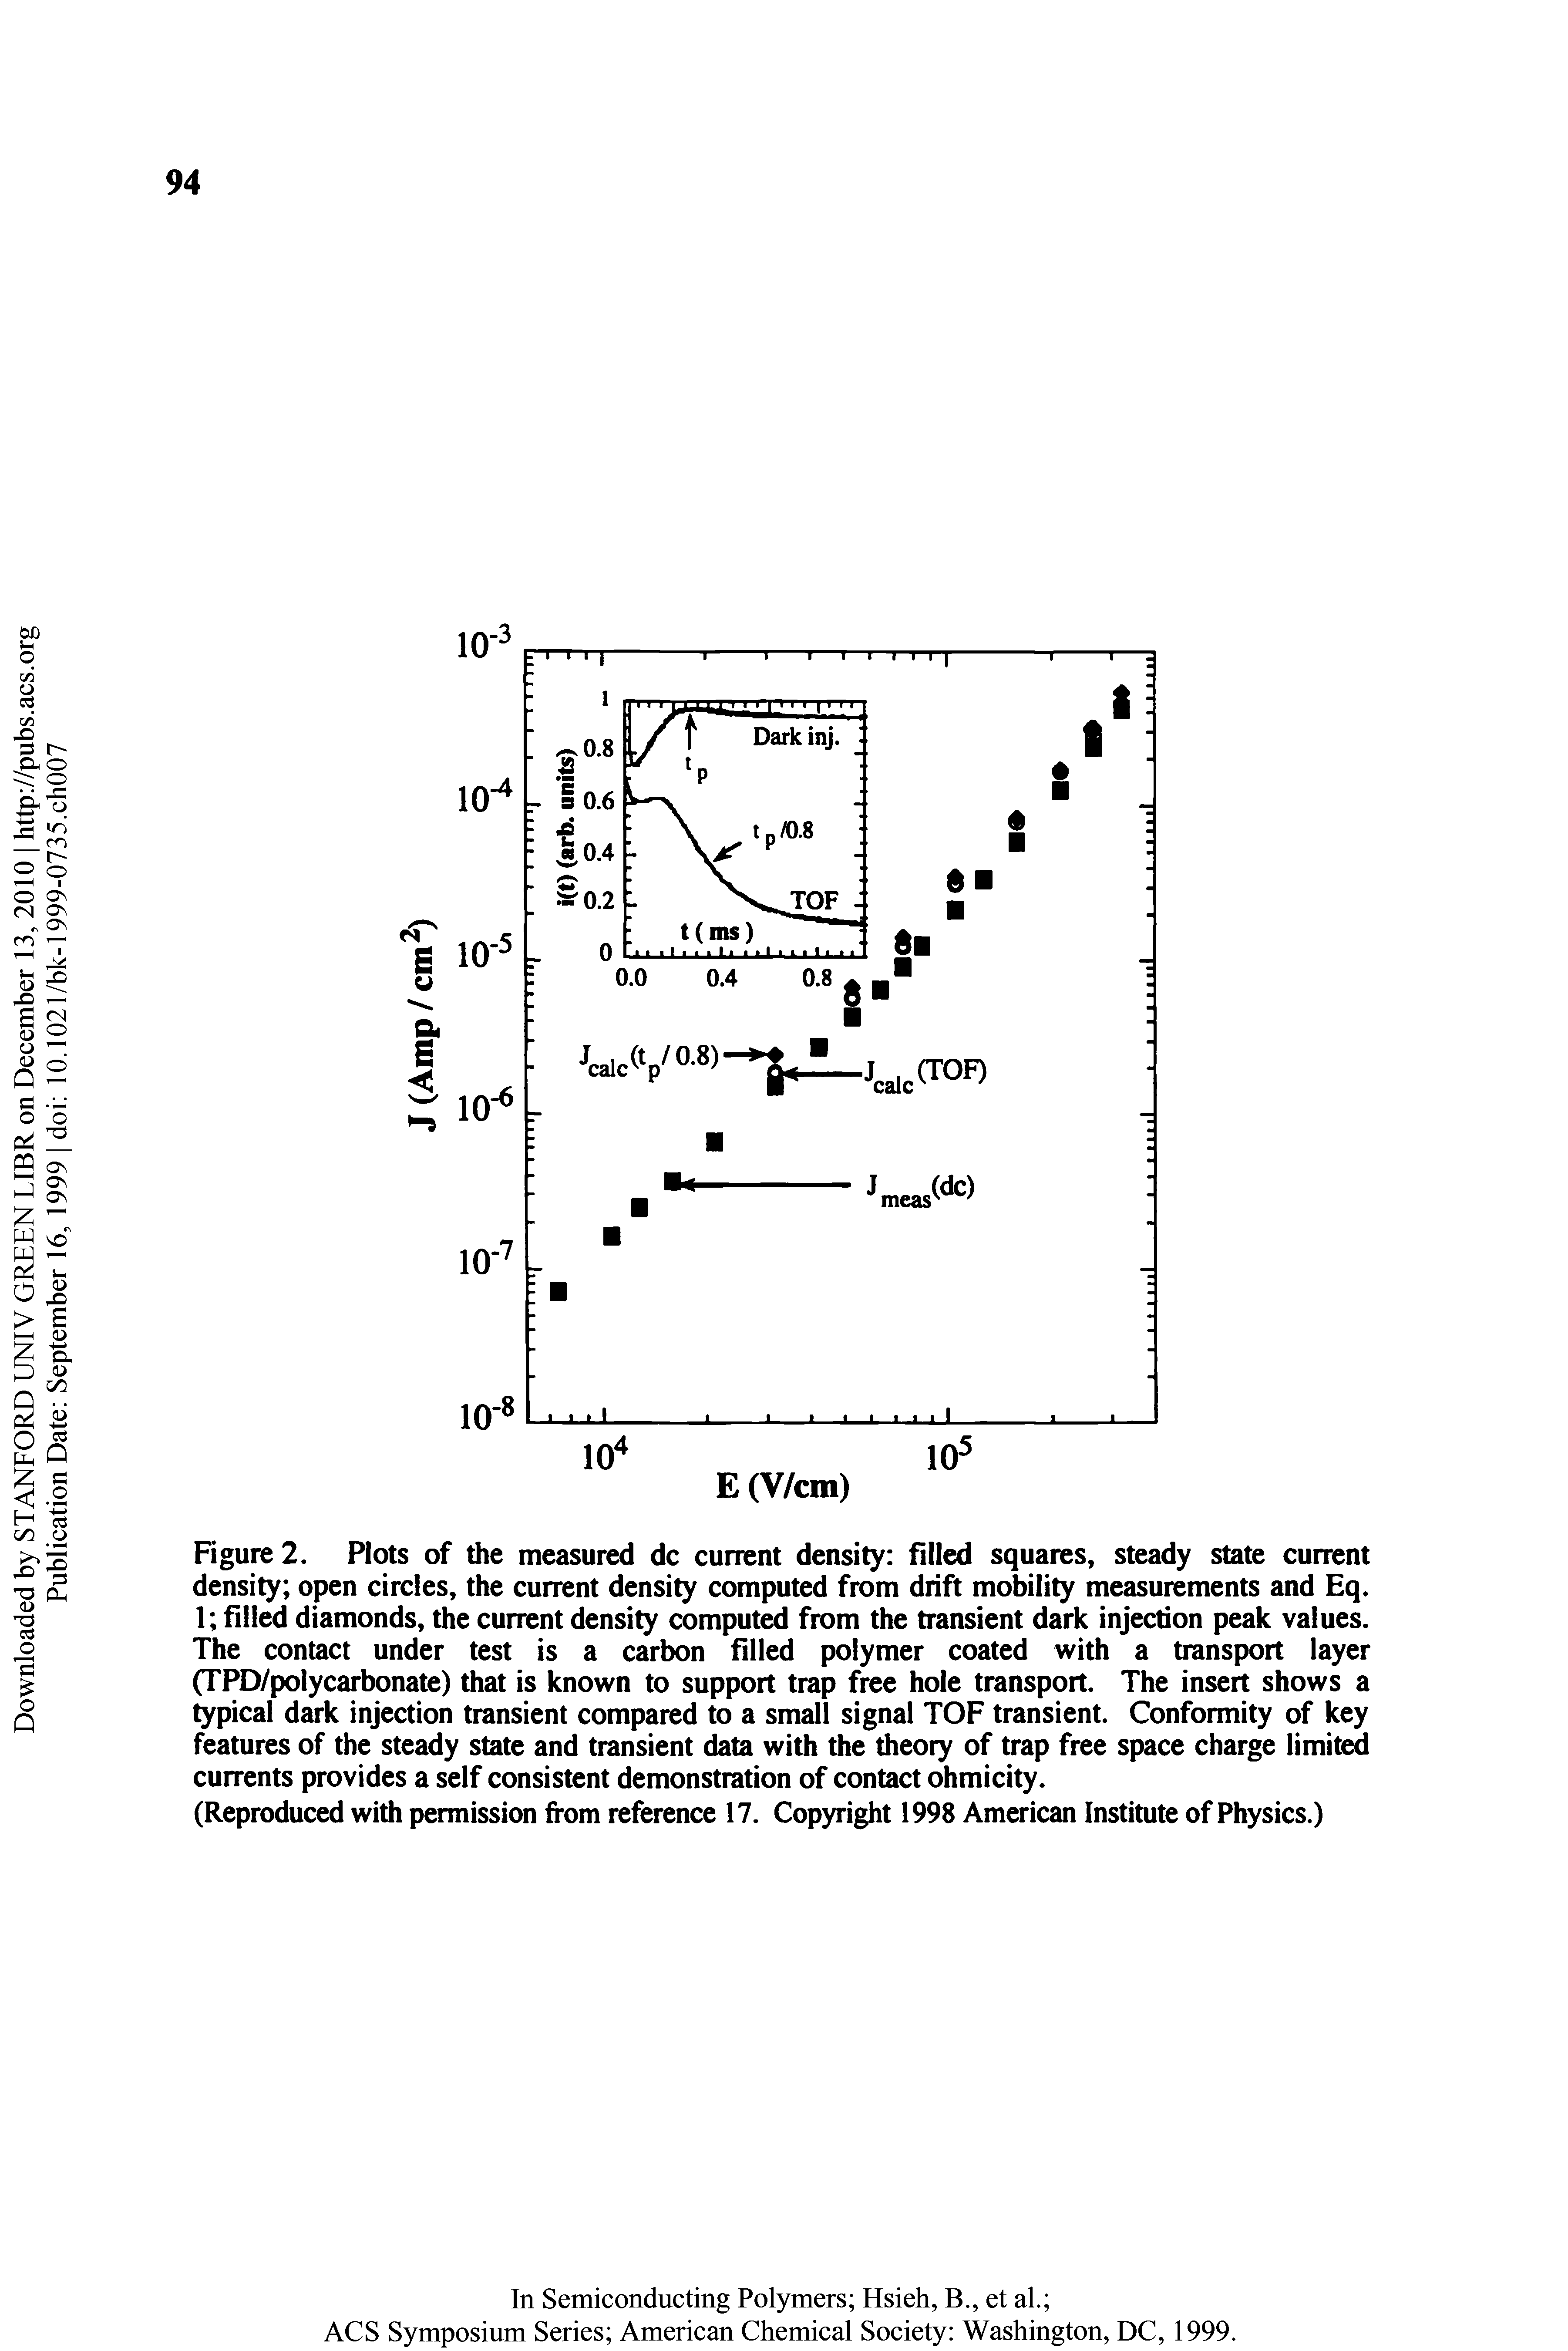 Figure 2. Plots of the measured dc current density filled squares, steady state current density open circles, the current density computed from drift mobility measurements and Eq. 1 filled diamonds, the current density computed from the transient dark injection peak values. The contact under test is a carbon filled polymer coated with a transport layer (TPD/polycarbonate) that is known to support trap free hole transport. The insert shows a typical dark injection transient compared to a small signal TOF transient. Conformity of key features of the steady state and transient data with the theory of trap free space charge limited currents provides a self consistent demonstration of contact ohmicity.